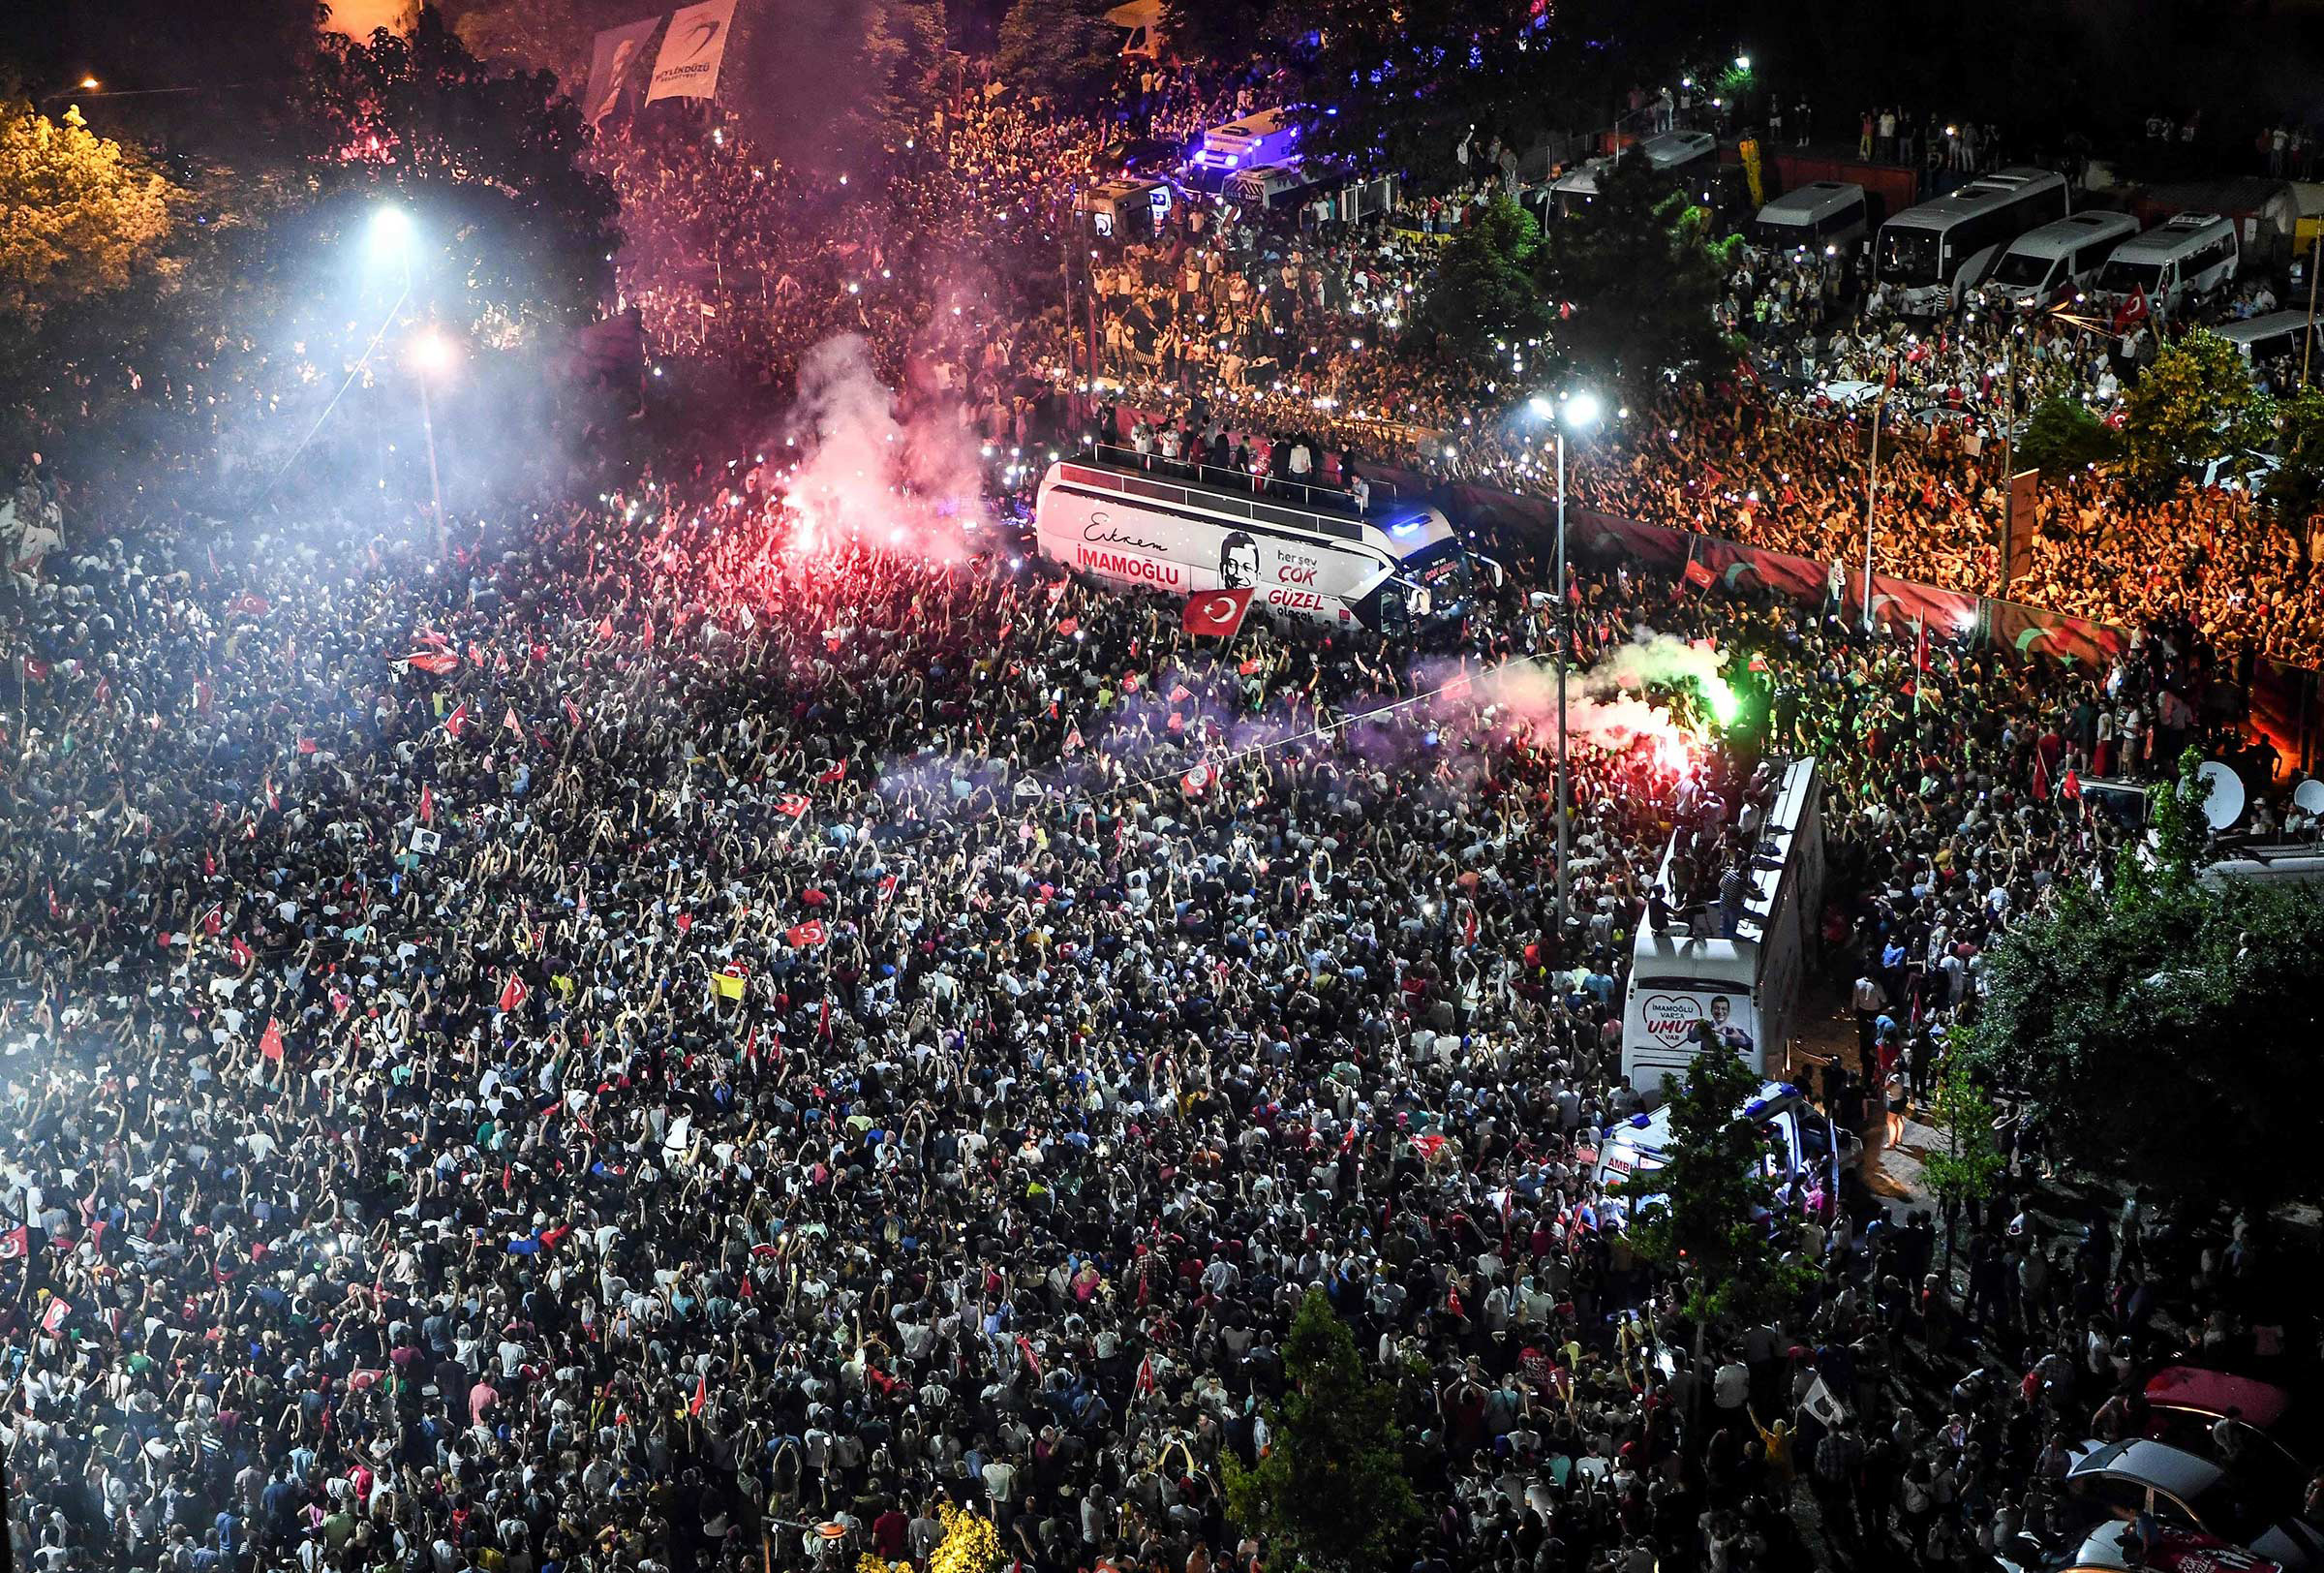 Thousands gathered to celebrate after the opposition candidate, Ekrem Imamoglu, emerged as winner of the repeat mayoral election in Istanbul on June 23, 2019. (STR/AFP/Getty Images)